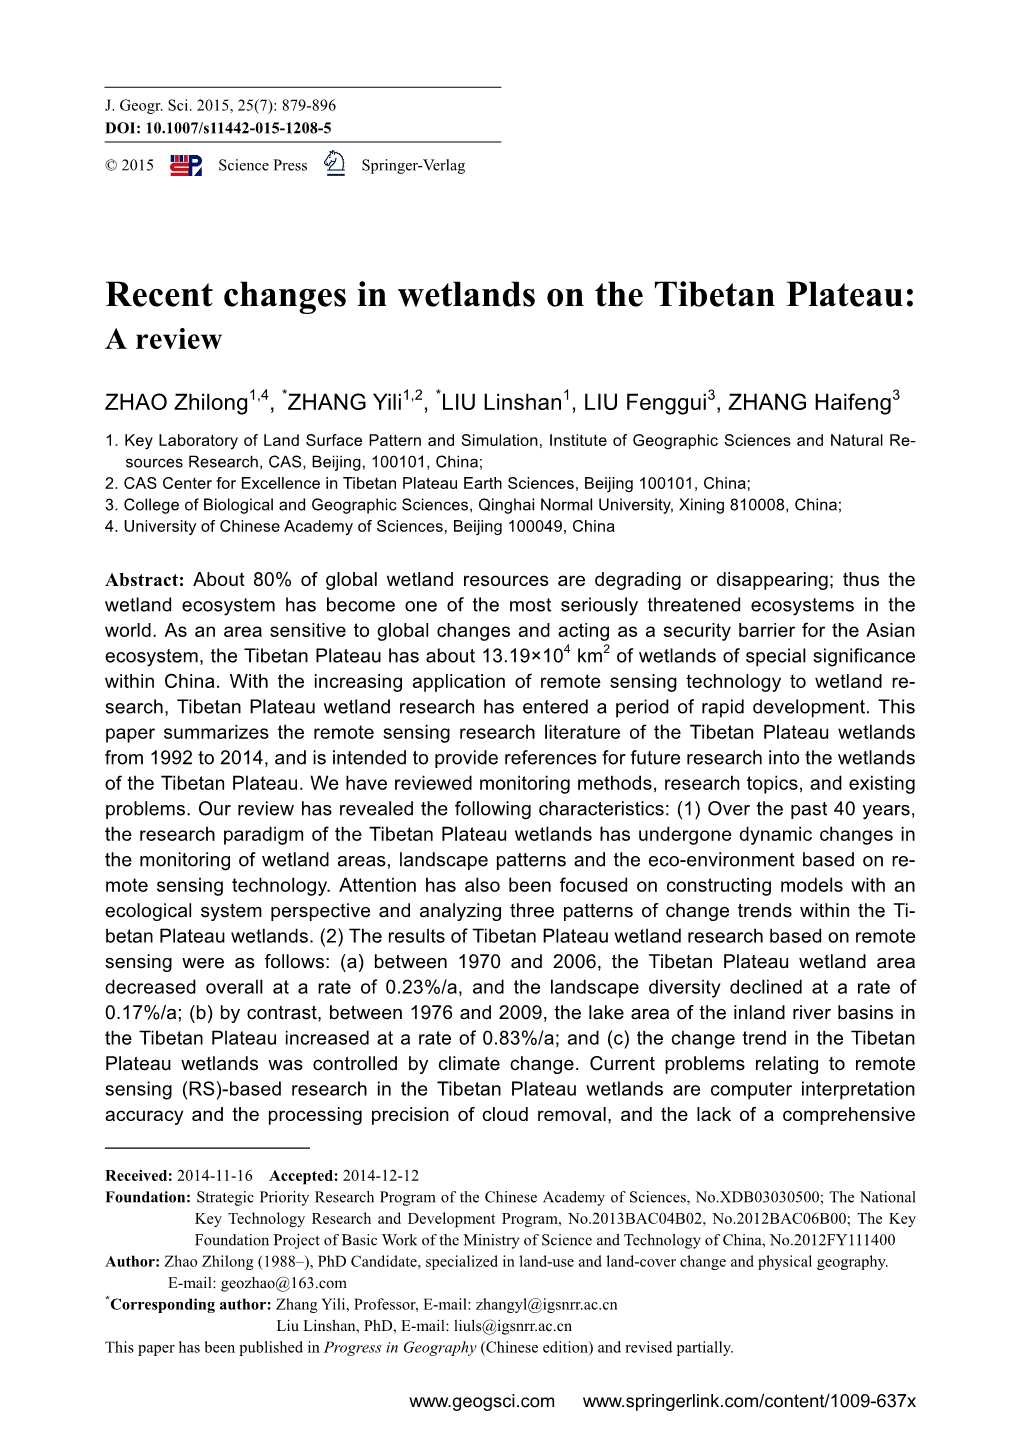 Recent Changes in Wetlands on the Tibetan Plateau: a Review